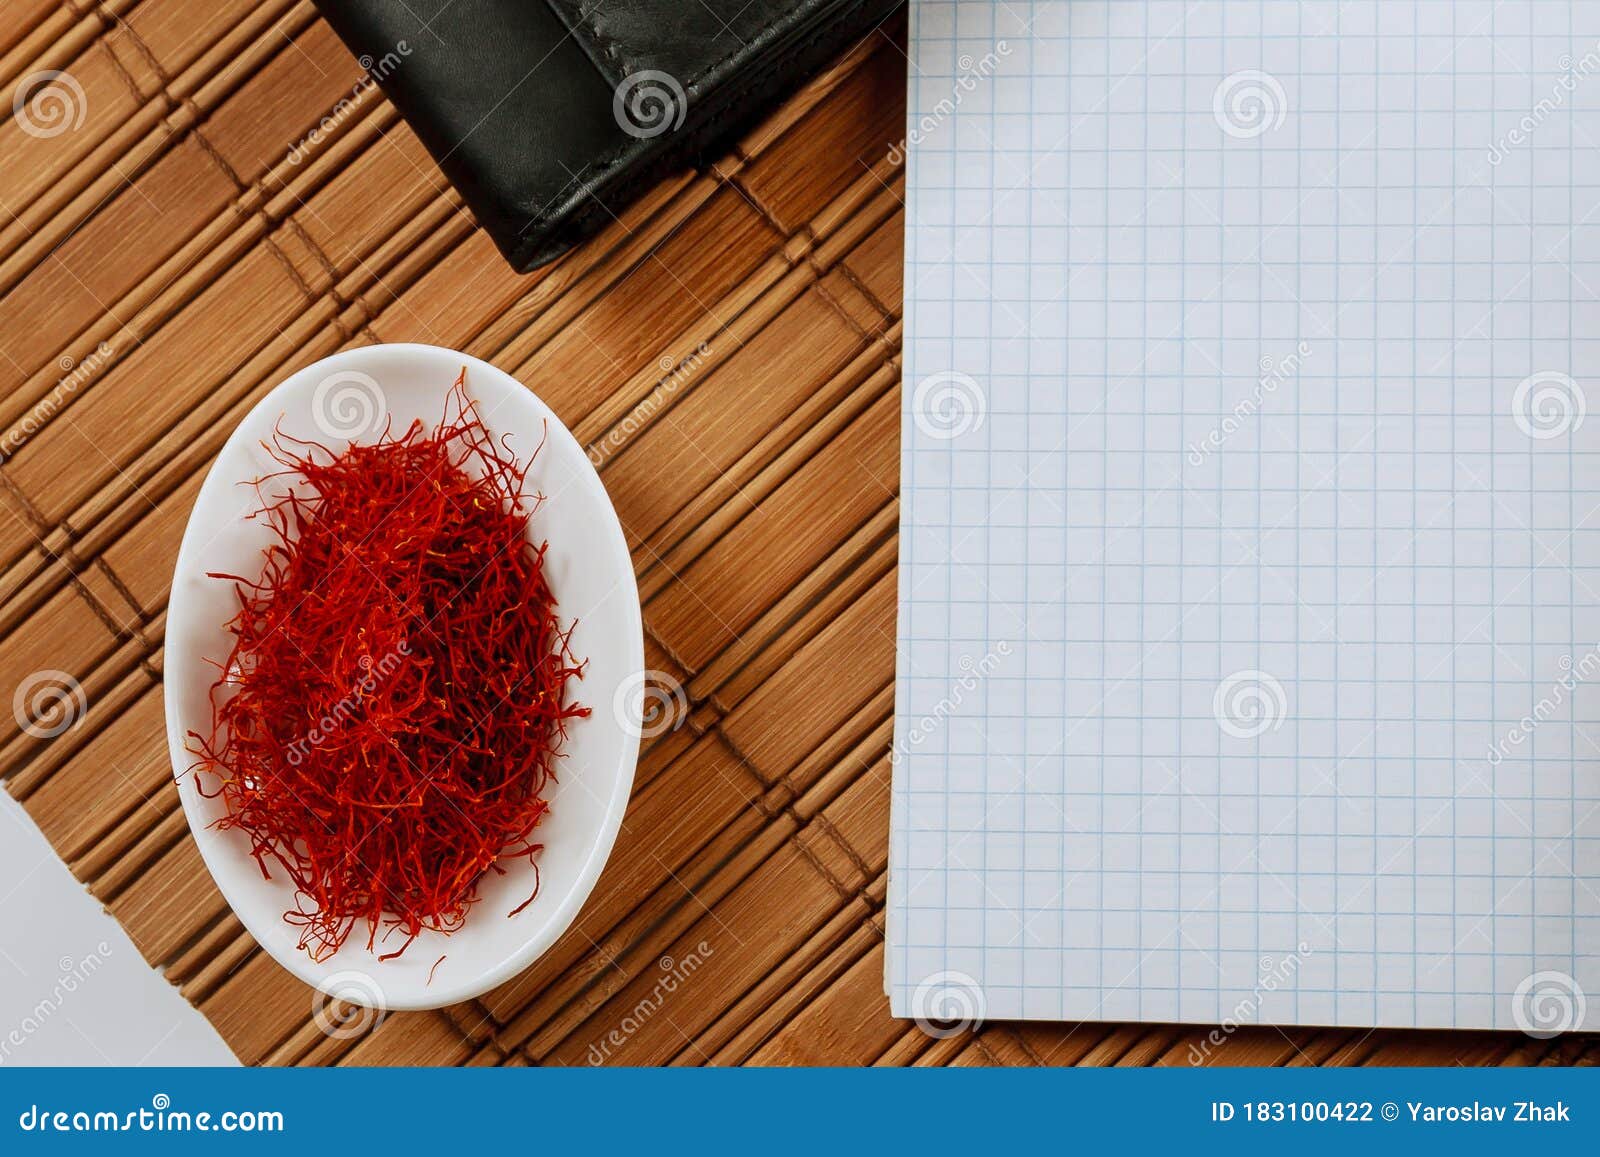 dry saffron spice on a white plate on wooden background. copy space